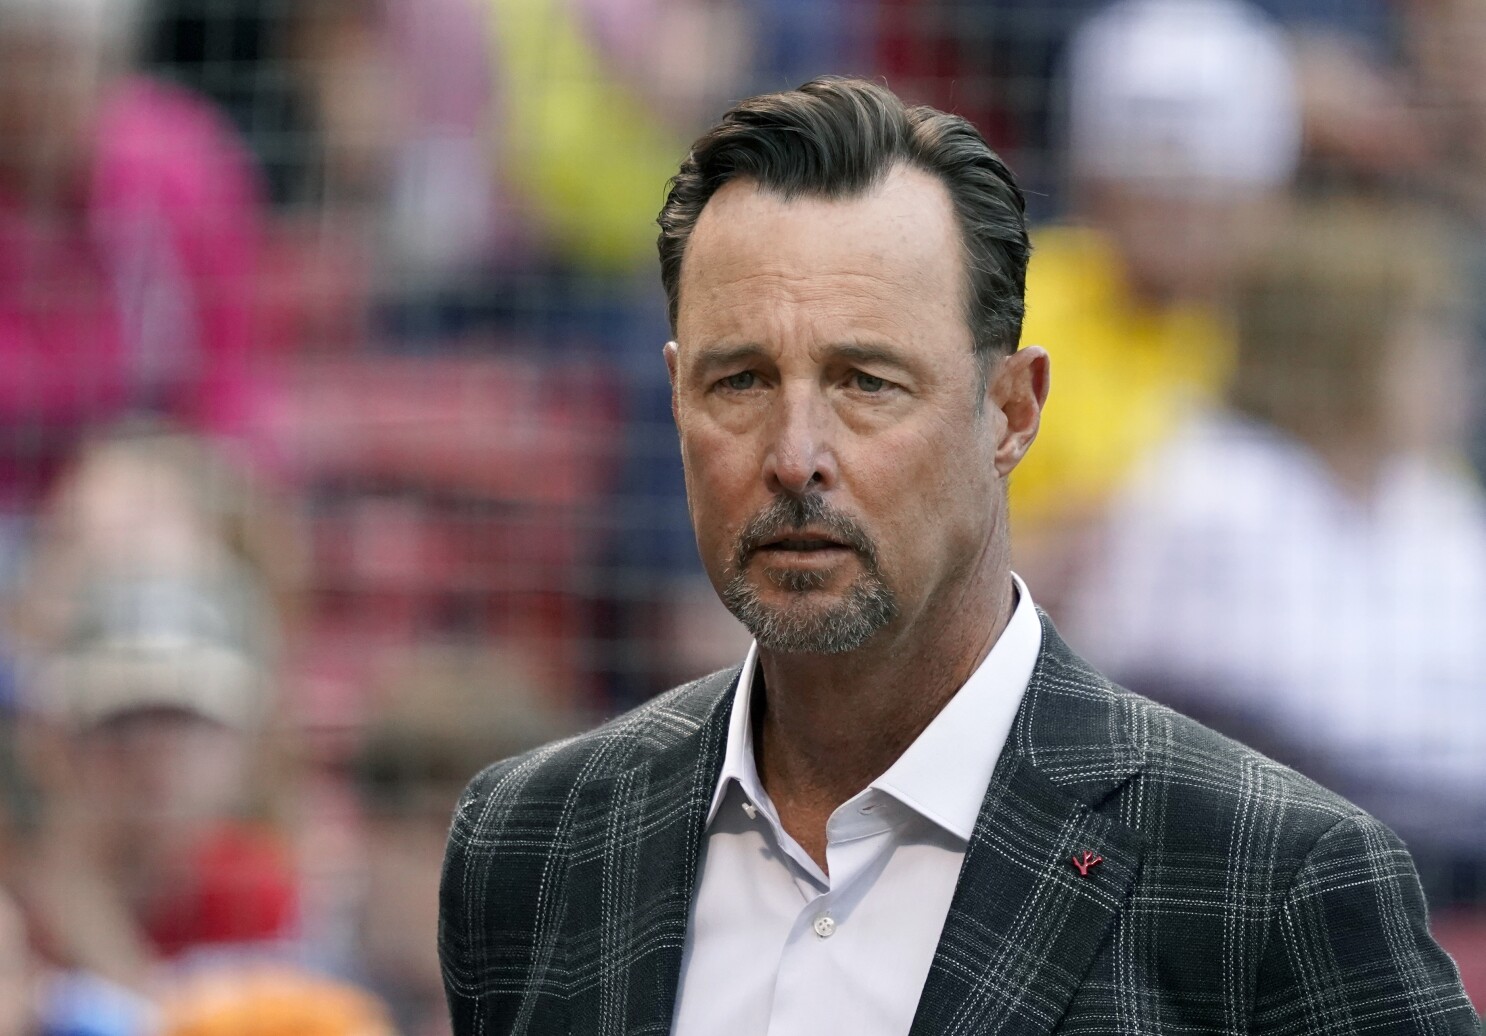 Melbourne ballfields to be renamed for Red Sox pitcher Tim Wakefield